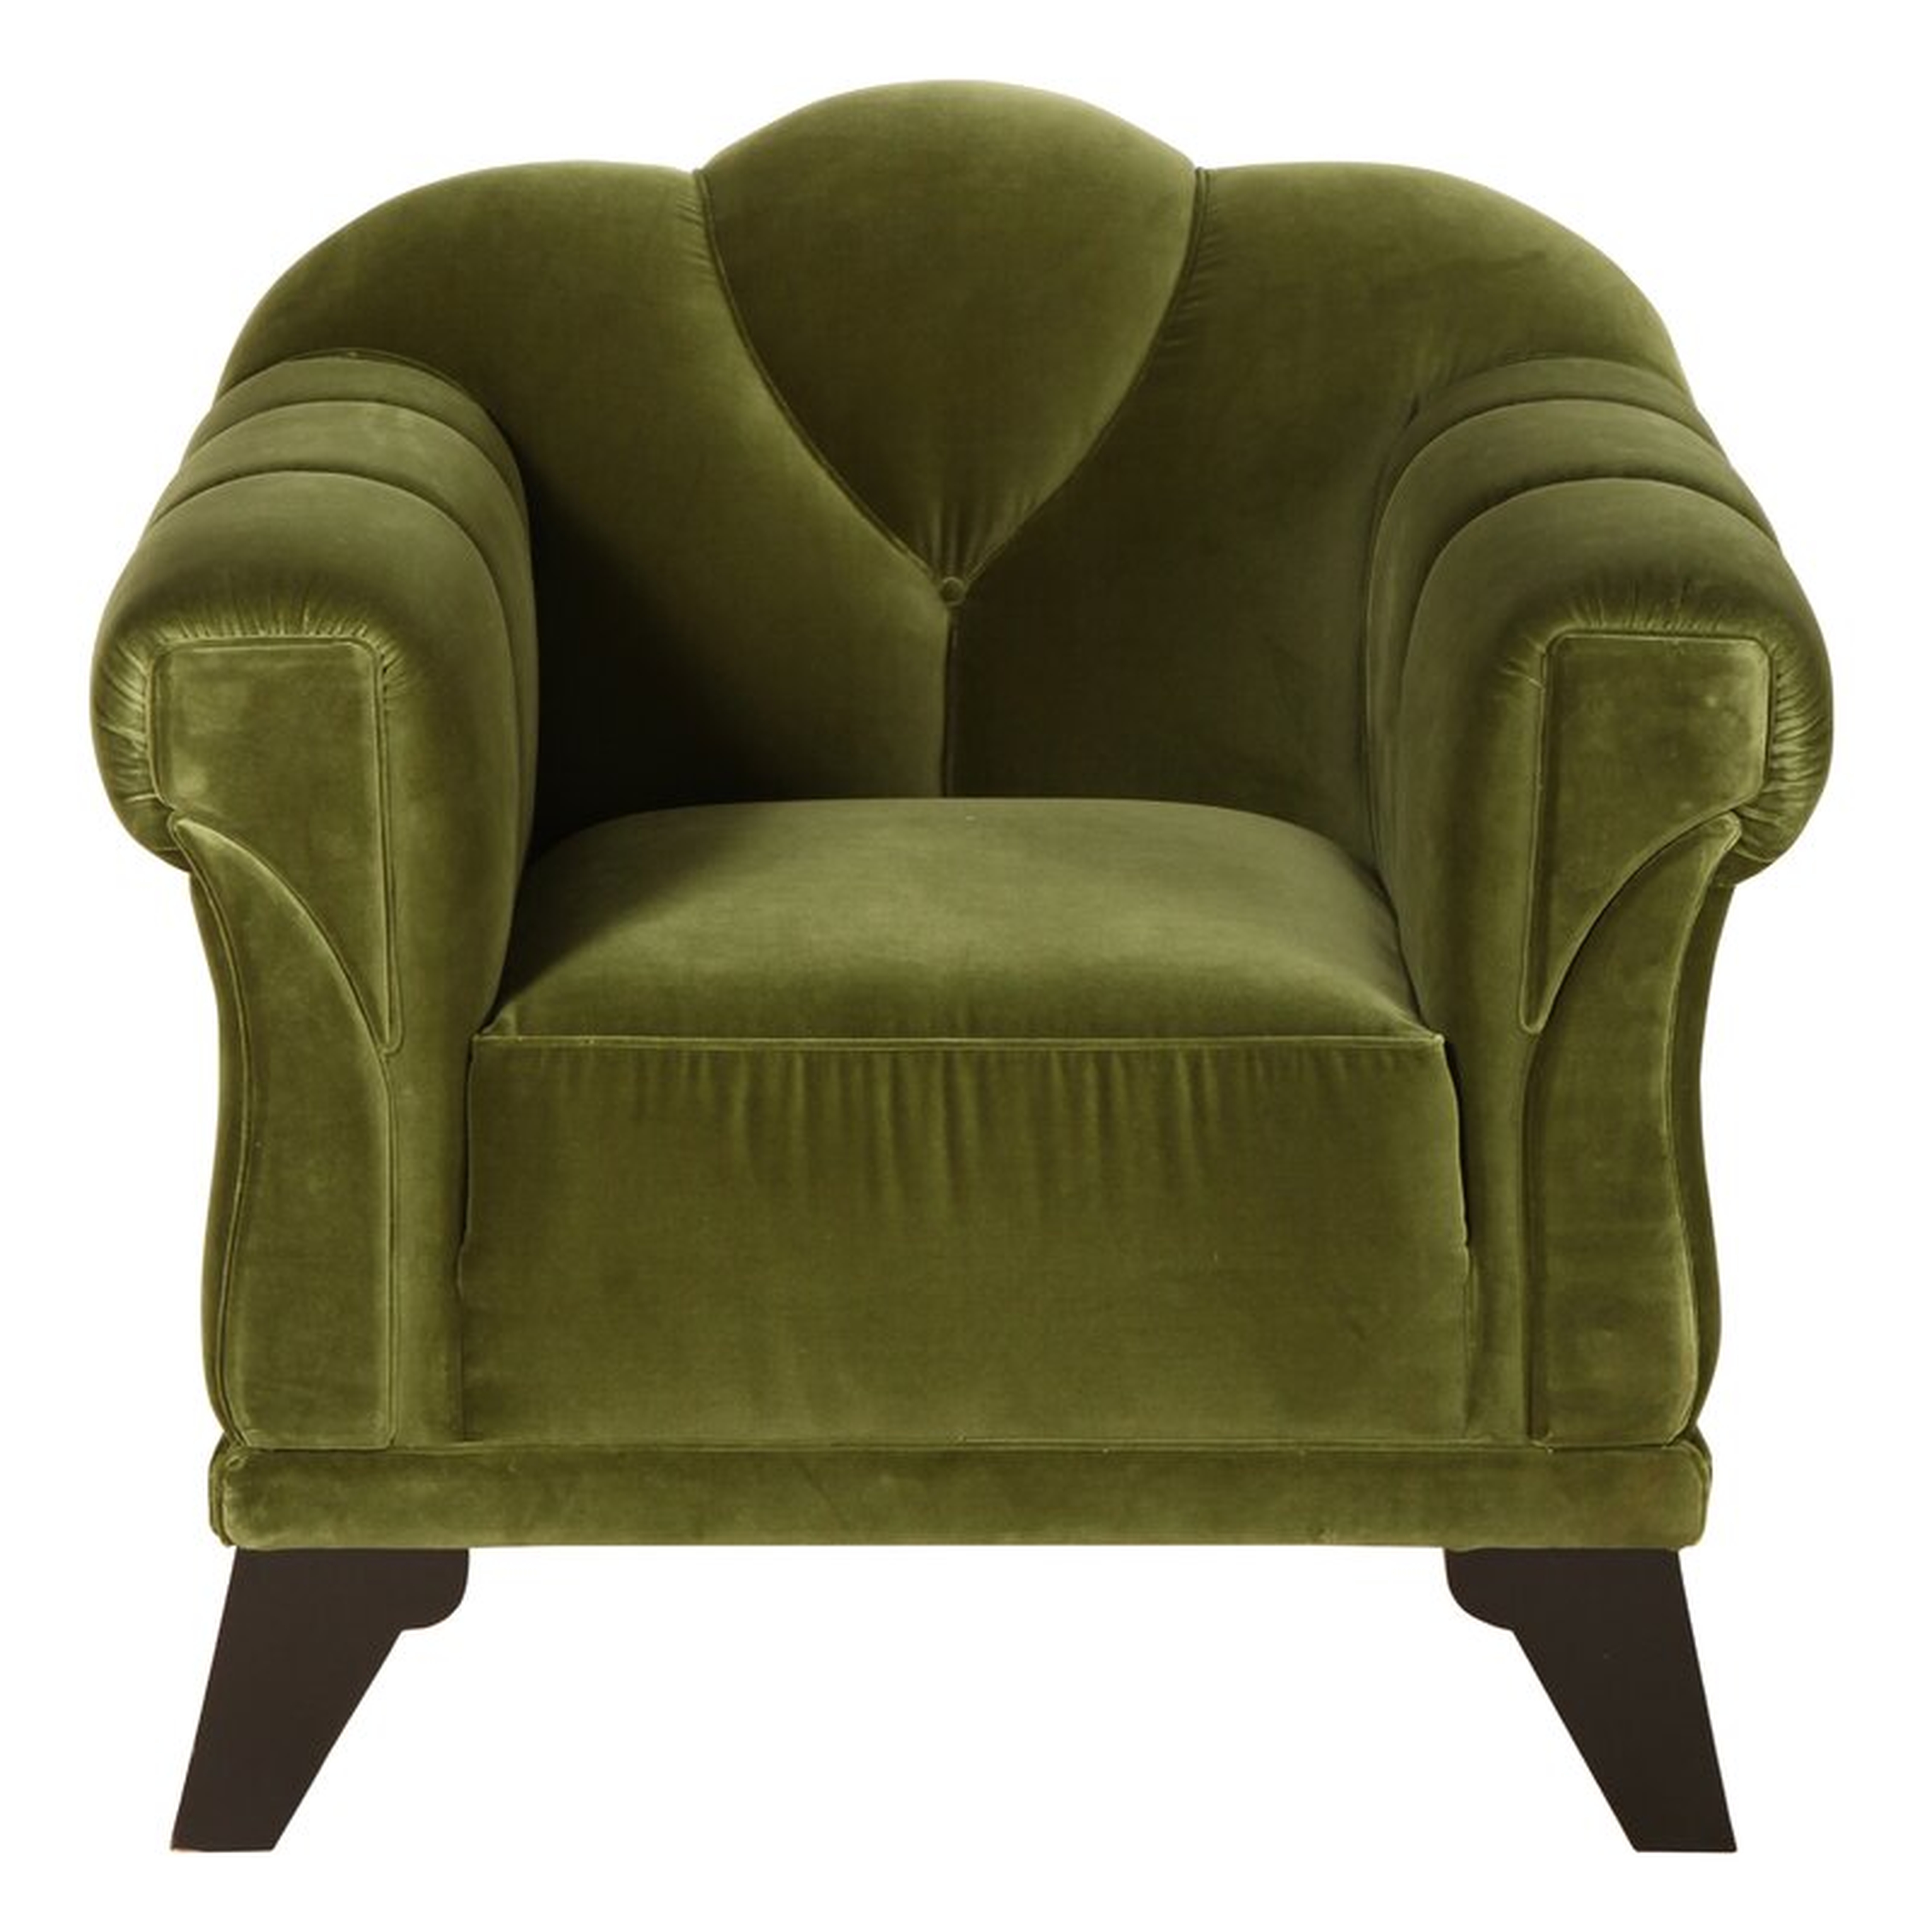 Bobo Intriguing Objects French 21'' Chesterfield Chair Fabric: forest green - Perigold